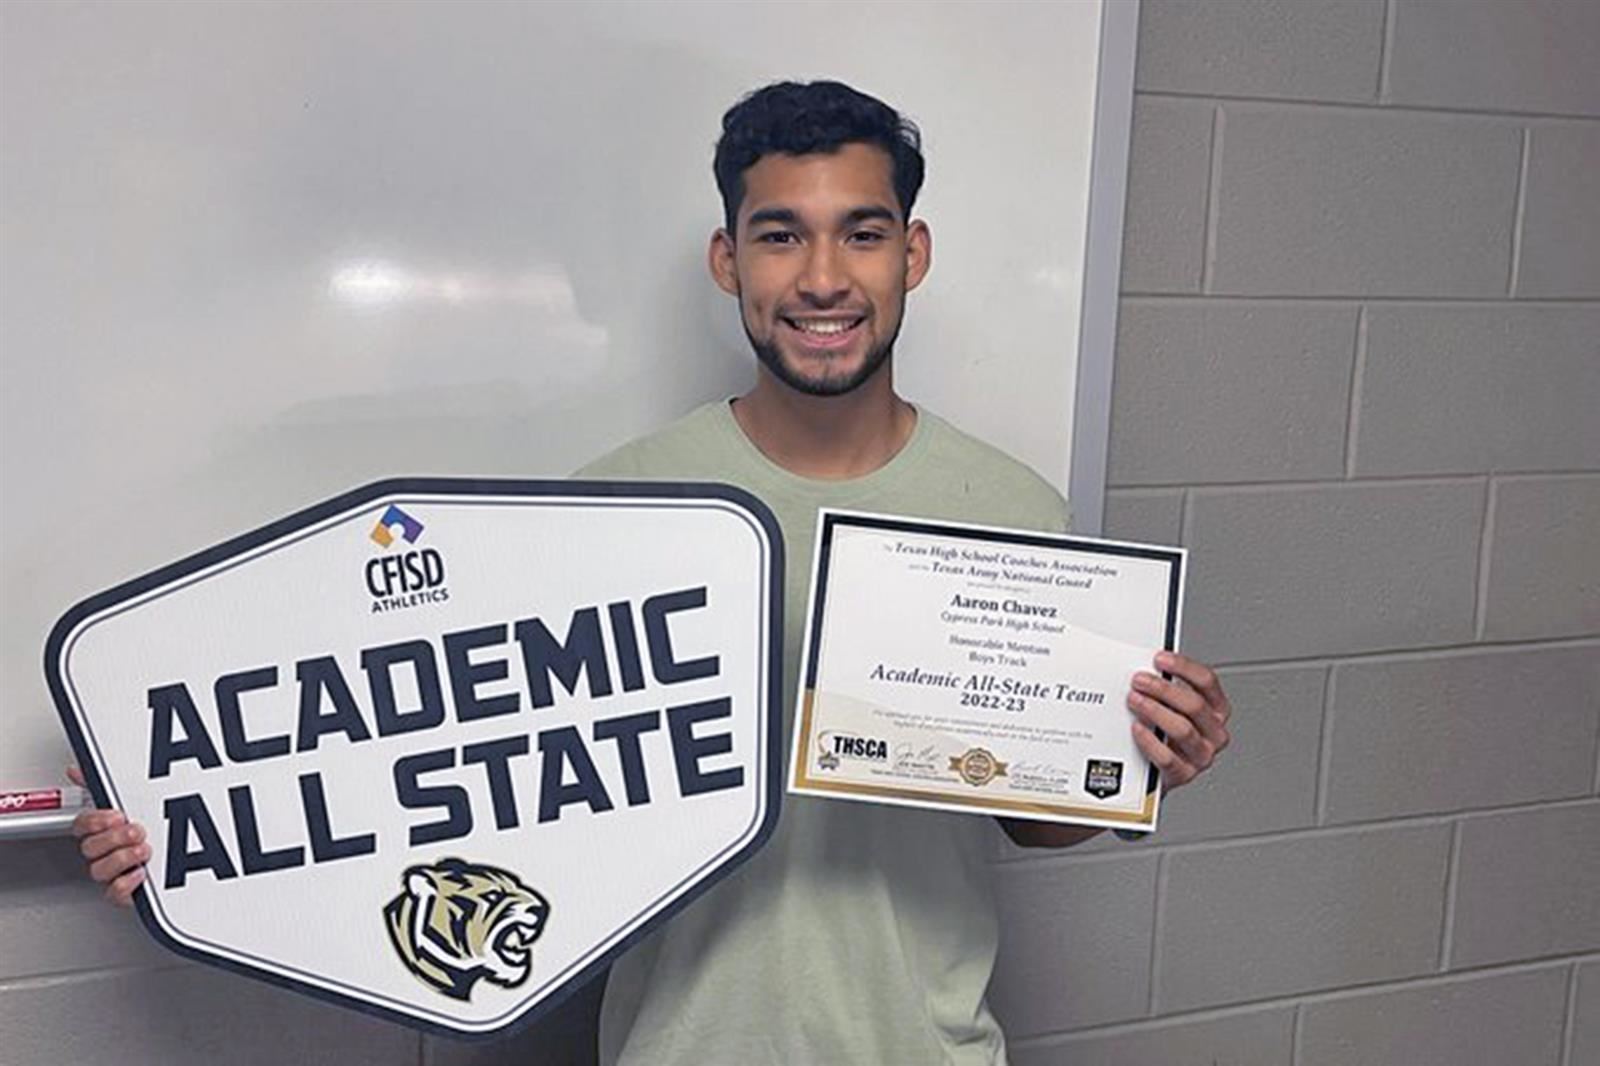 Cy Park High School graduate Aaron Chavez was among 29 CFISD student-athletes named to the THSCA Academic All-State Team.